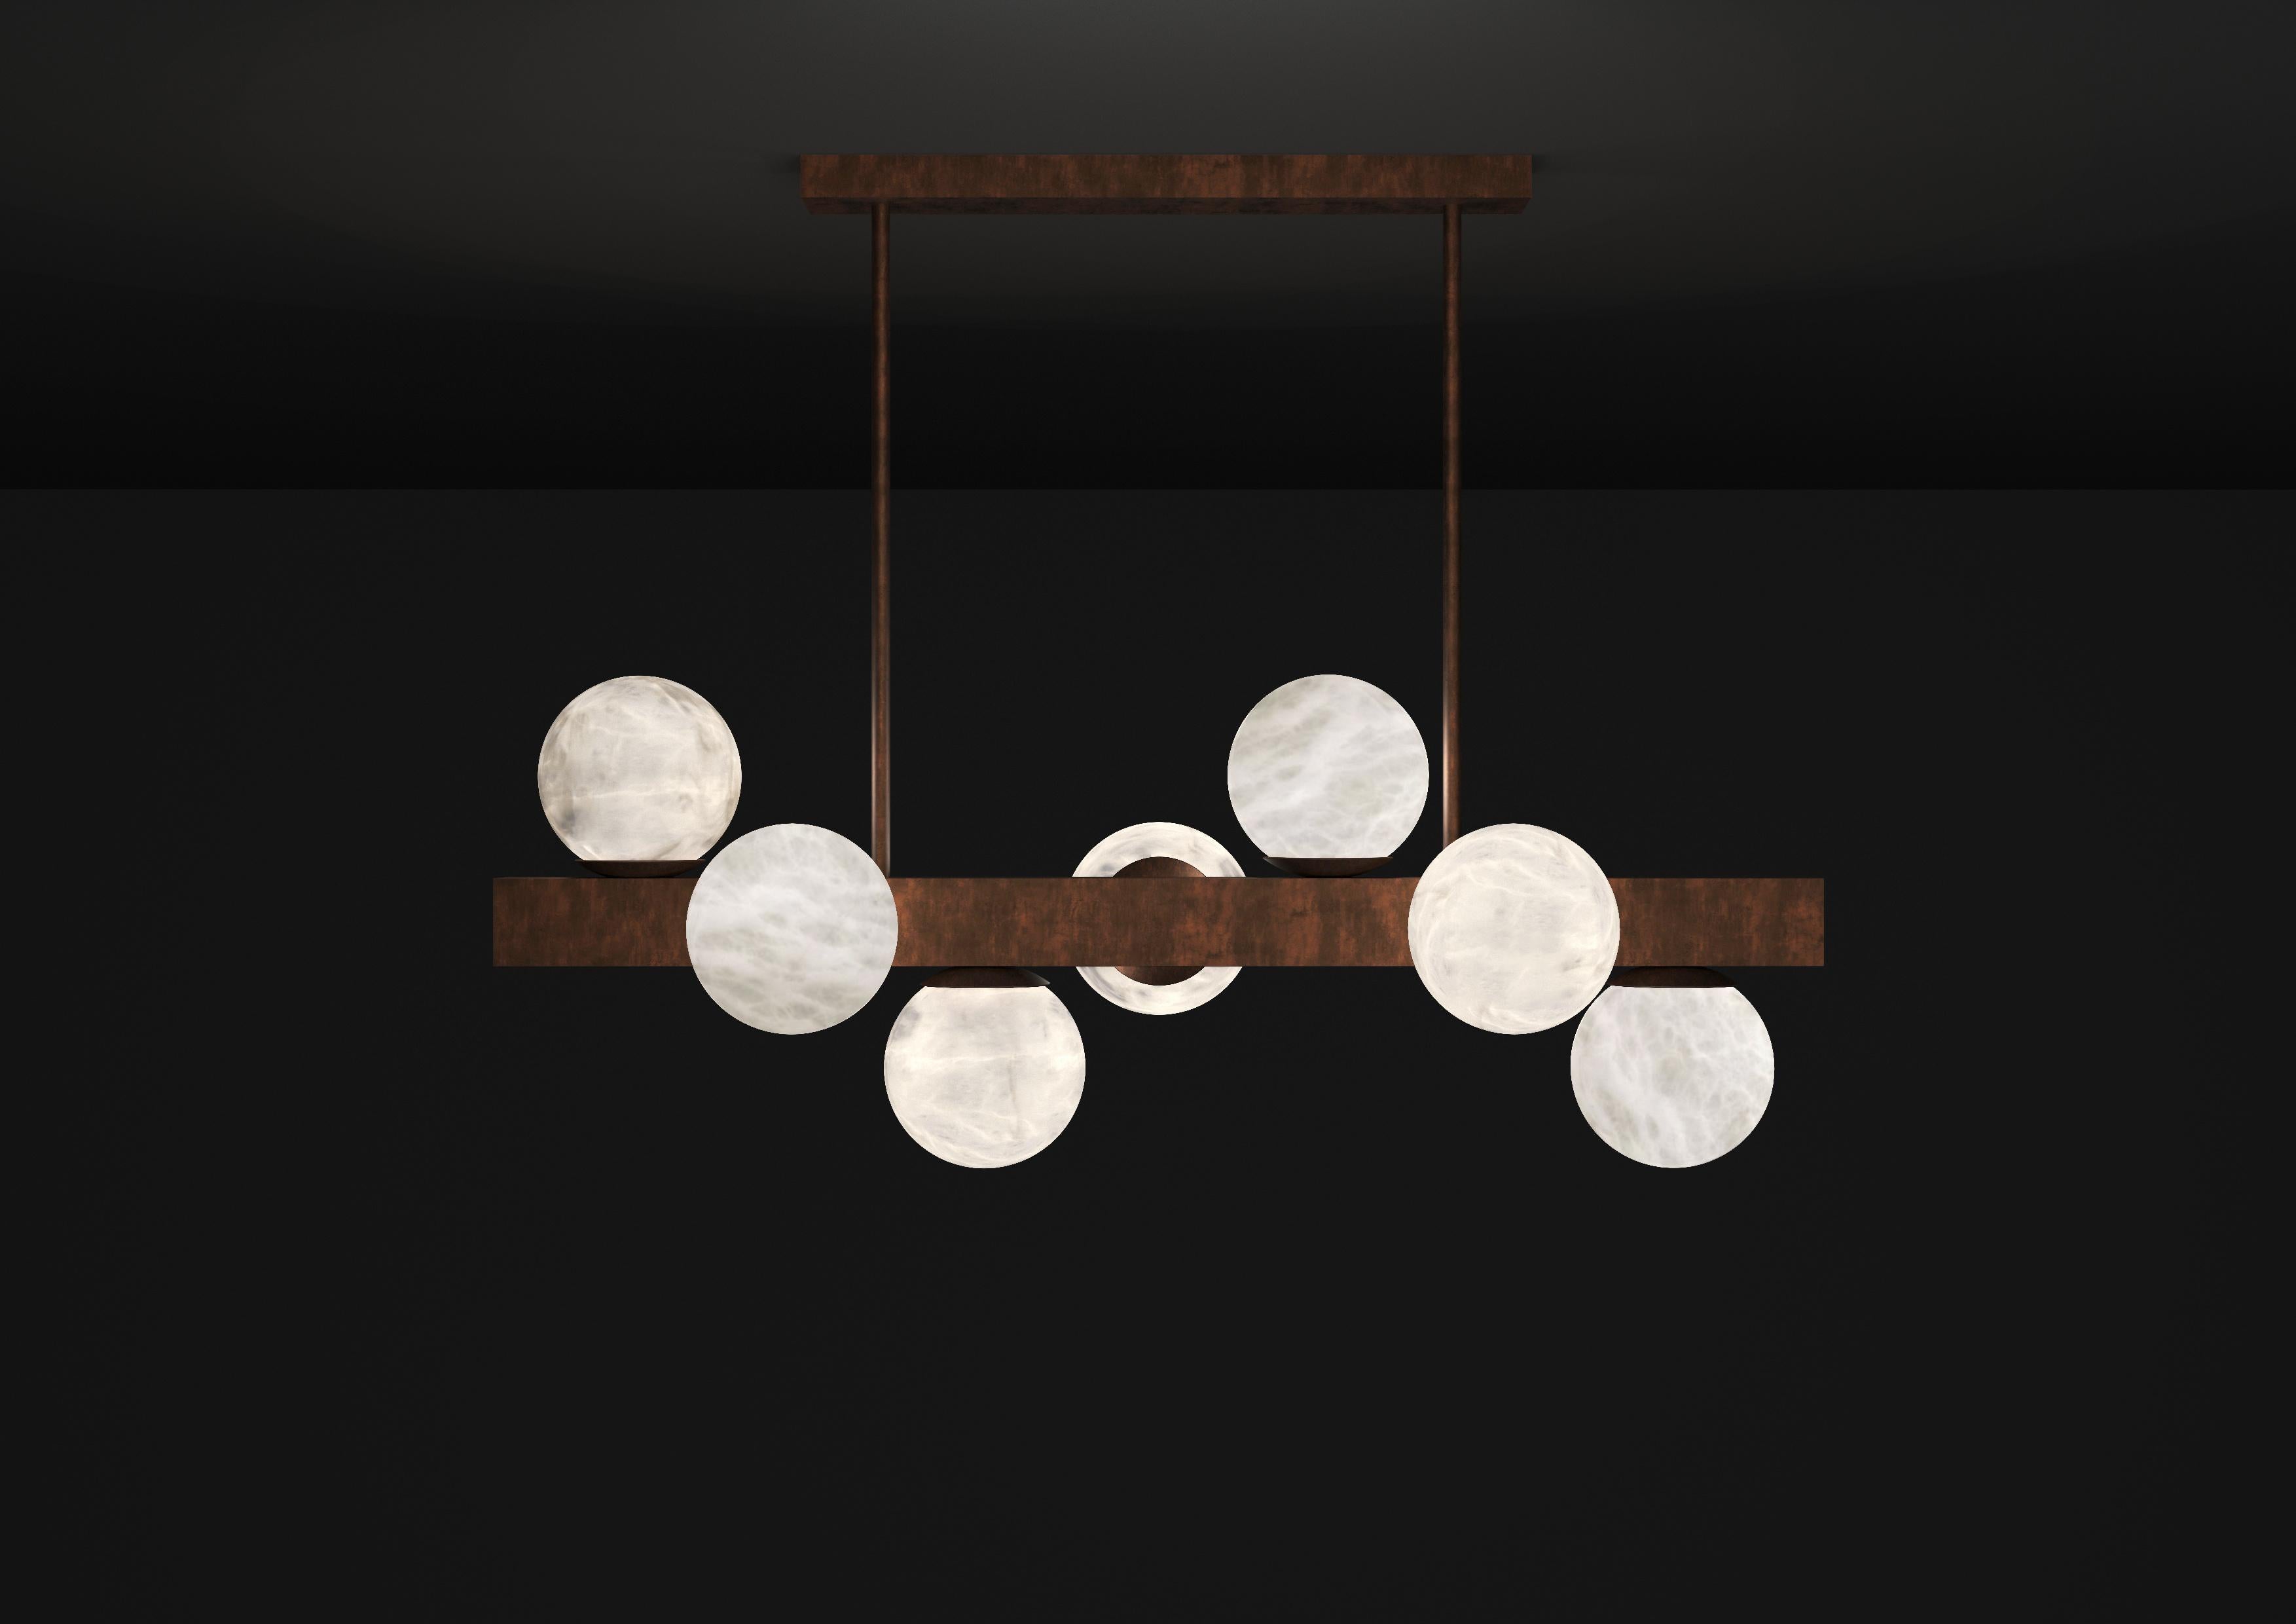 Dioniso Ruggine Of Florence Metal Pendant Lamp by Alabastro Italiano
Dimensions: D 35 x W 91 x H 36 cm.
Materials: White alabaster and metal.

Available in different finishes: Shiny Silver, Bronze, Brushed Brass, Ruggine of Florence, Brushed